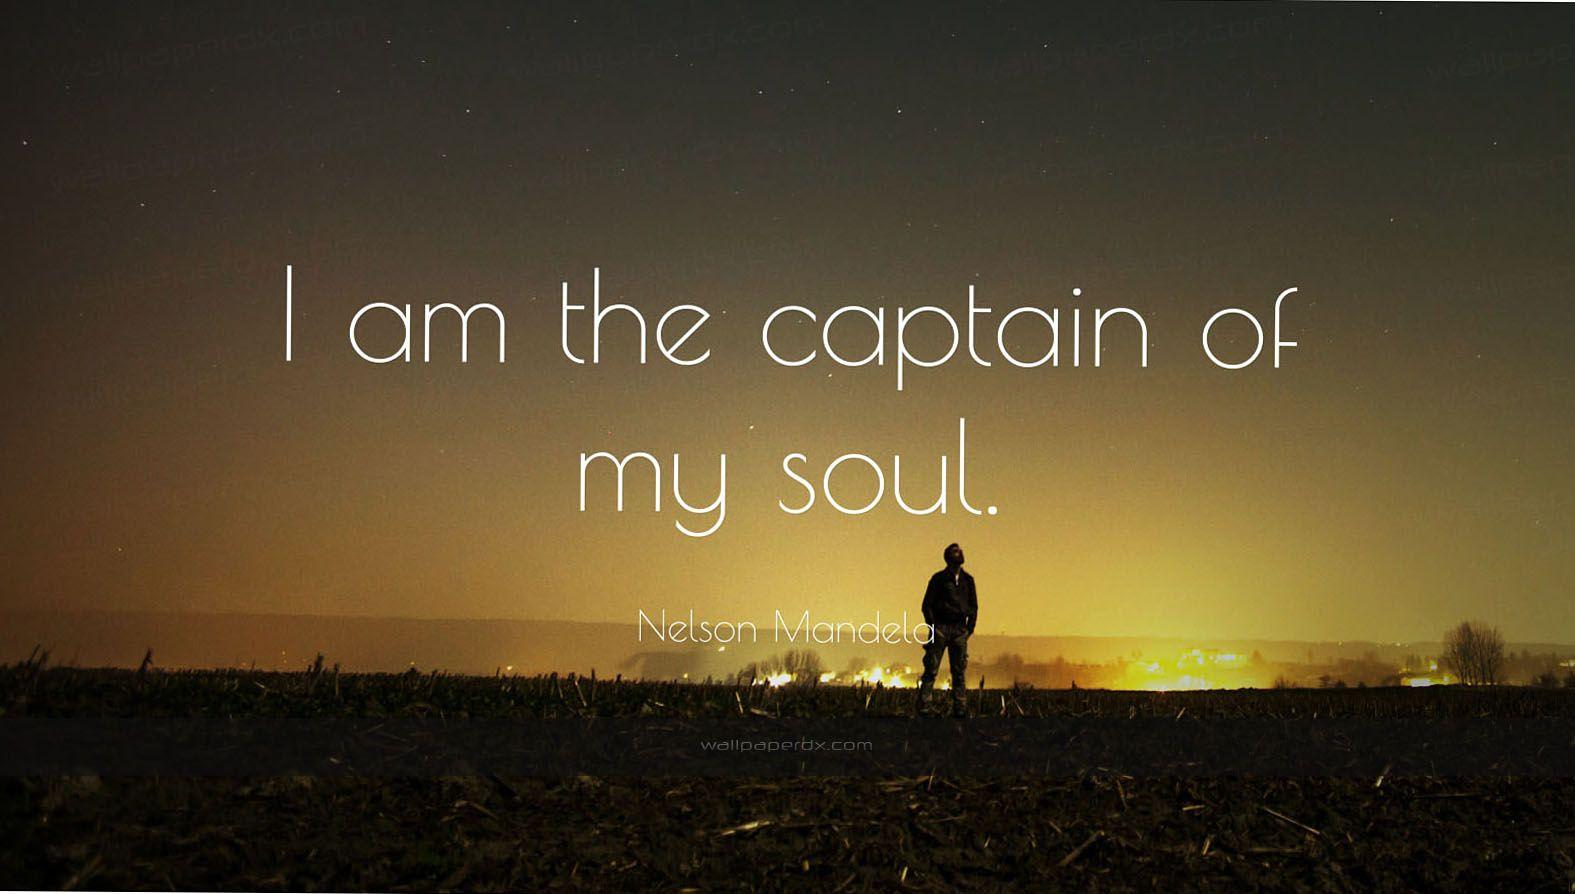 nelson mandela quote i am the captain of my soul HD wallpaper